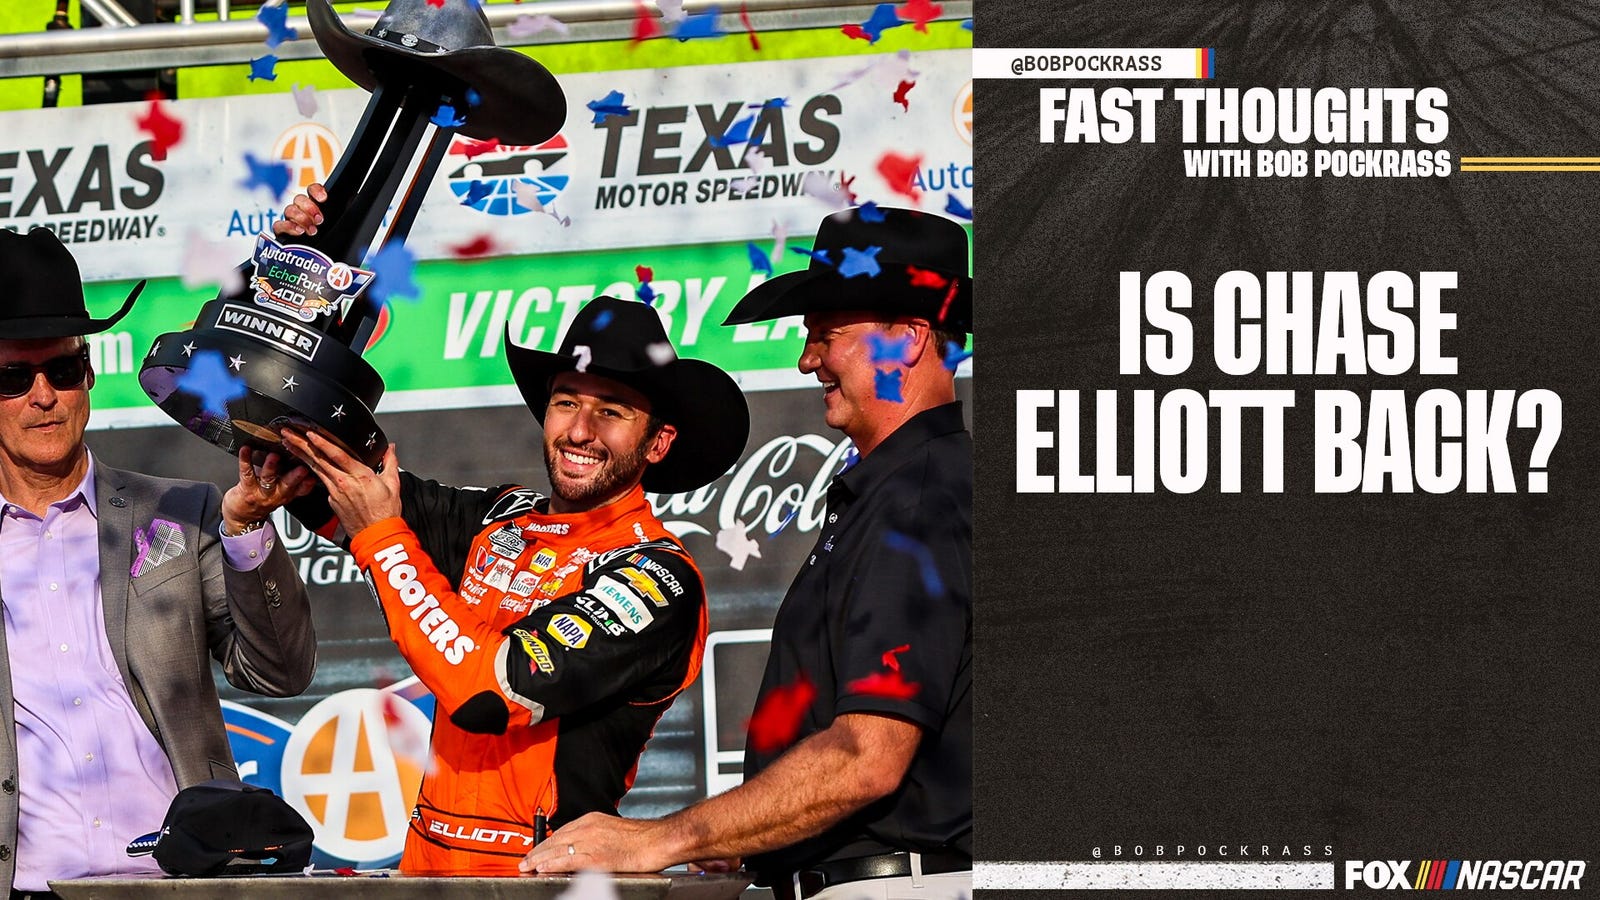  Is Chase Elliott back after snapping a 42-race winless streak at Texas?